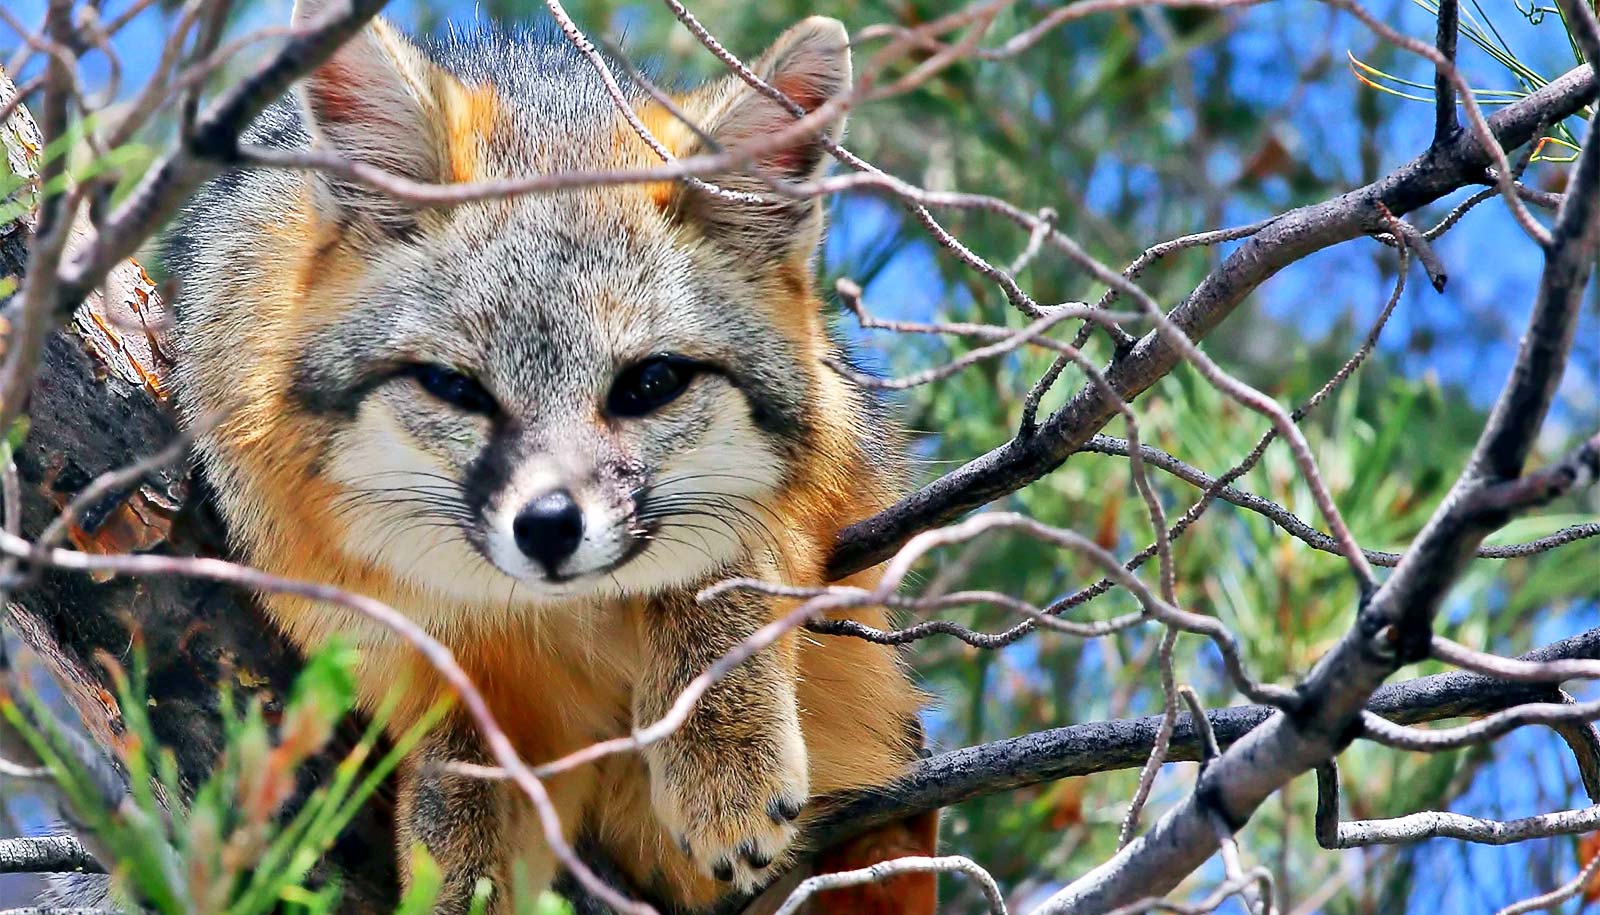 Tree climbing may save gray foxes from coyotes - Futurity